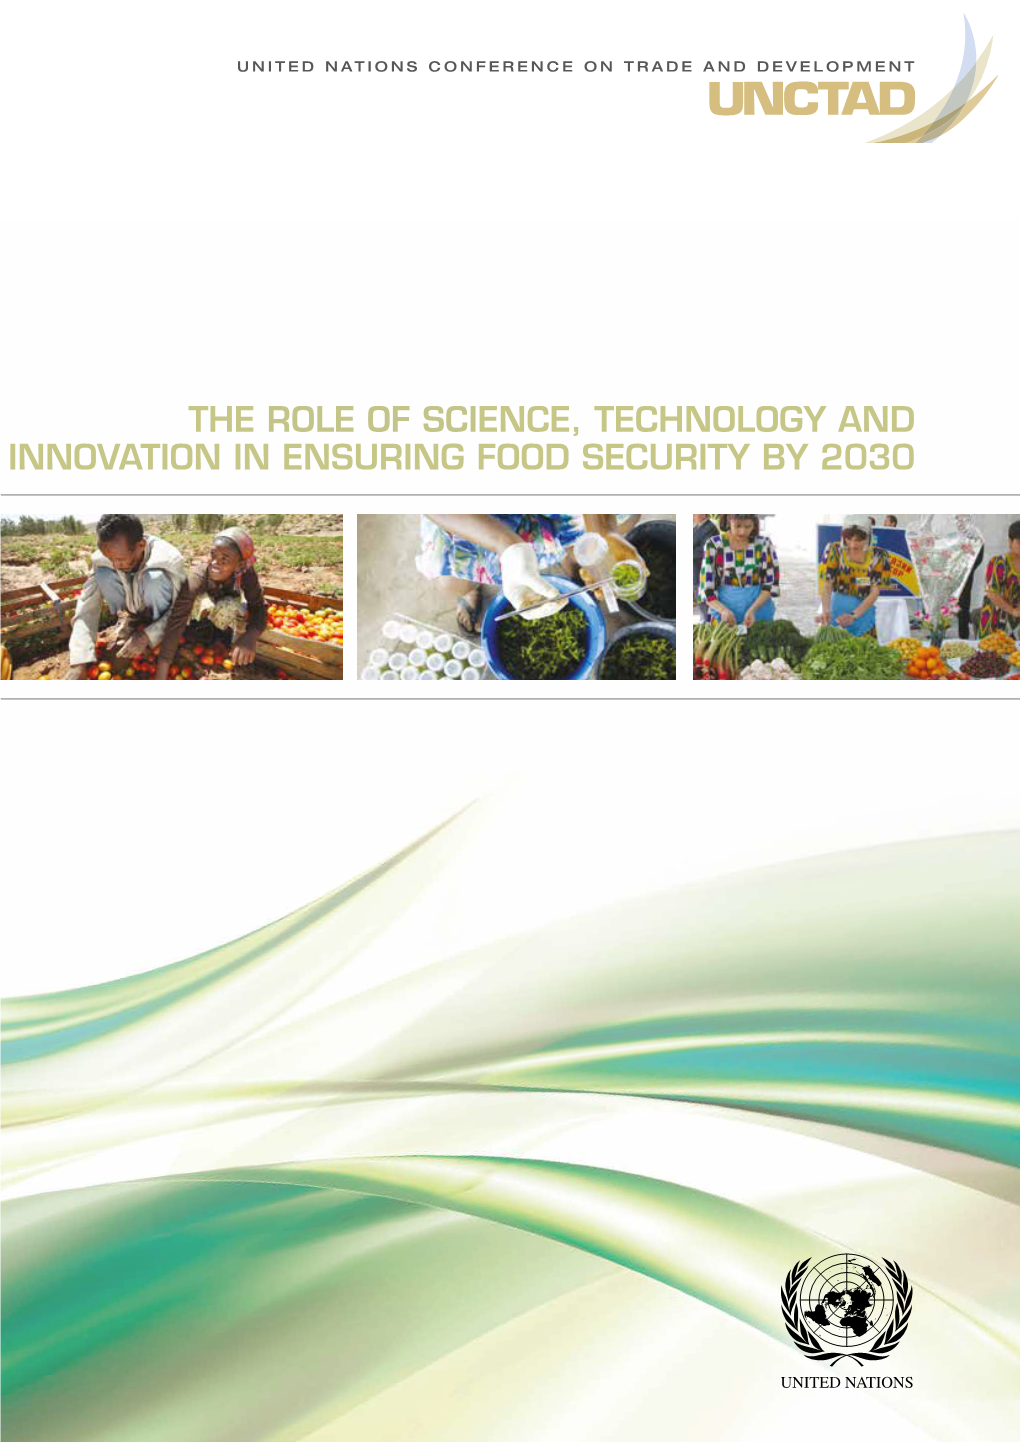 The Role of Science, Technology and Innovation in Ensuring Food Security by 2030